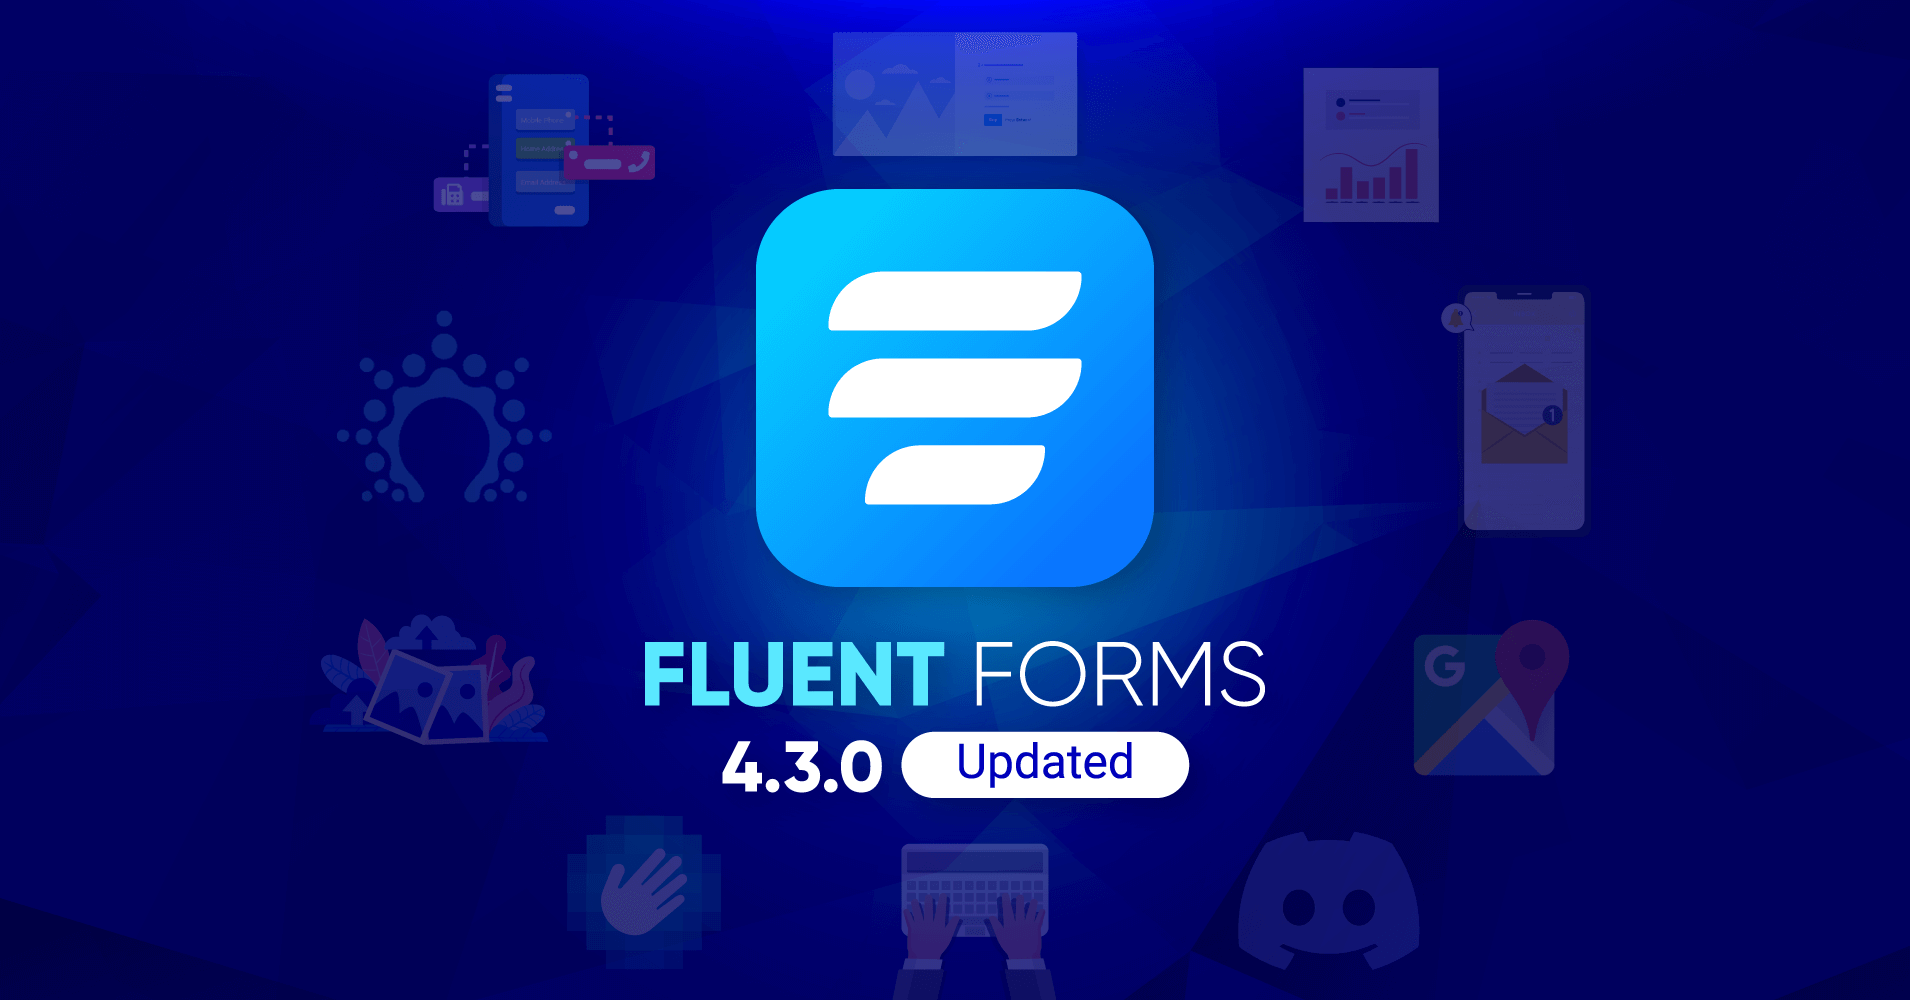 Fluent Forms release note-4.3.0